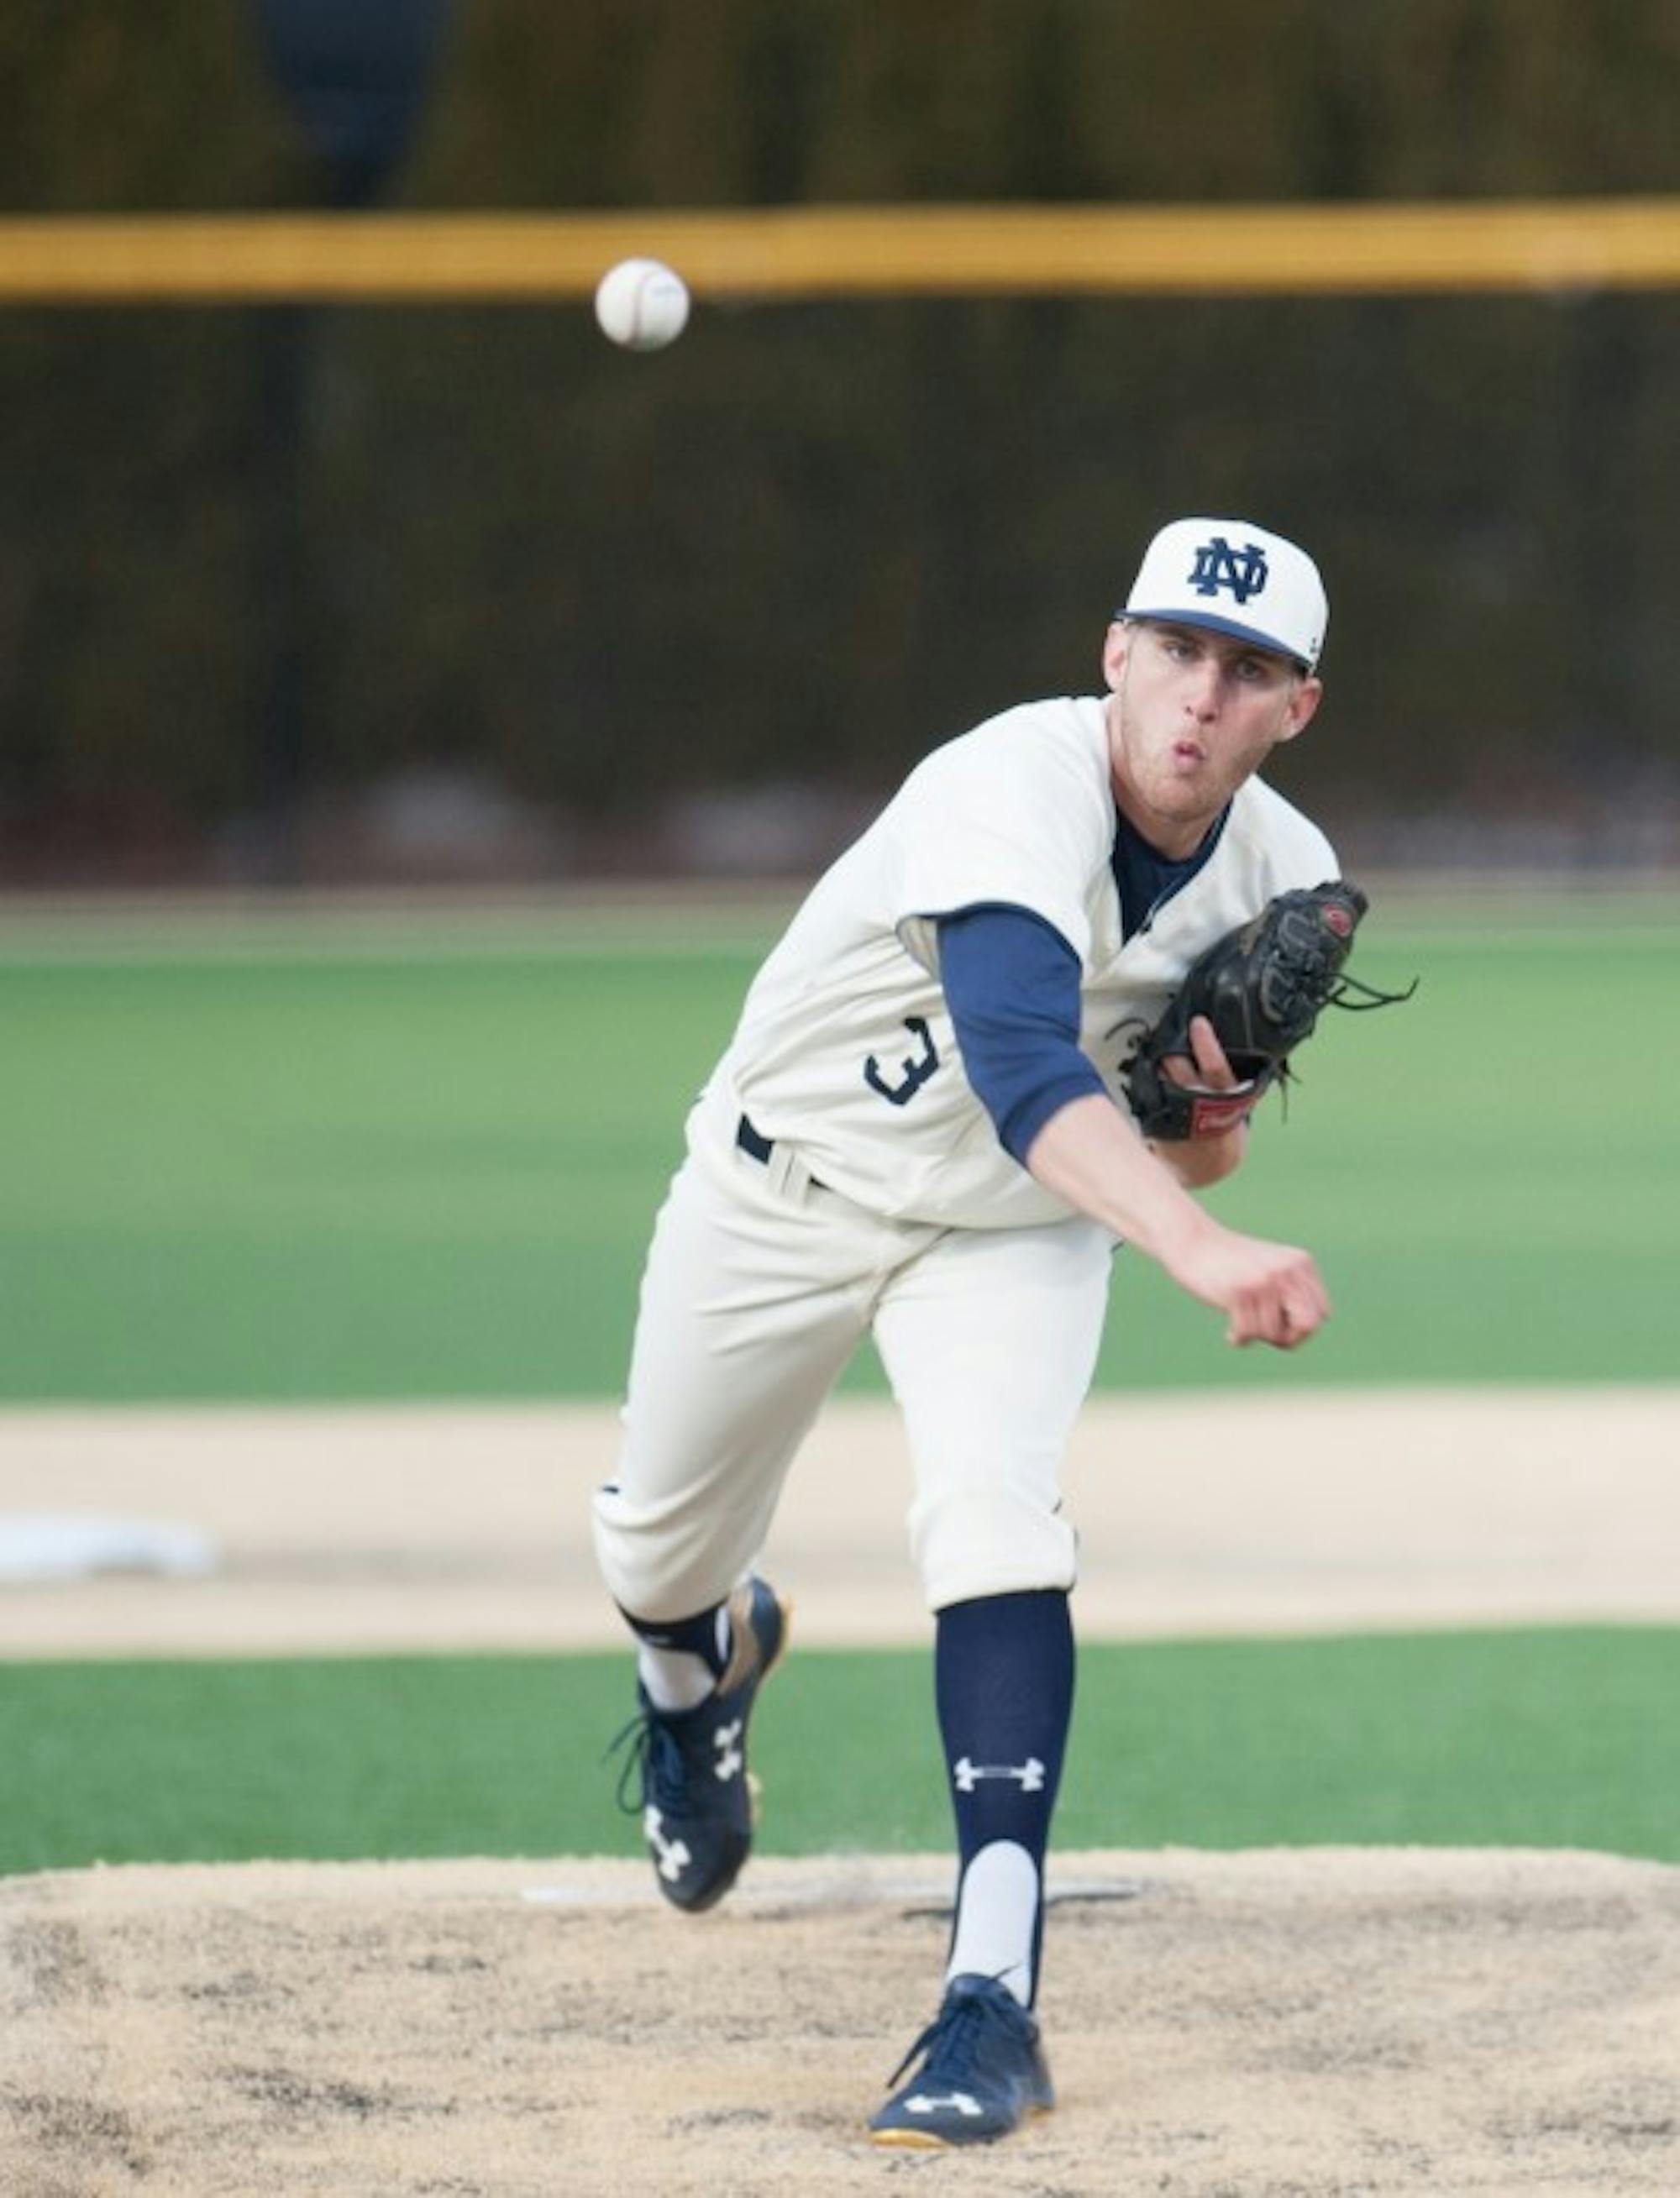 Irish sophomore right-hander Ryan Smoyer delivers a pitch during Notre Dame's 8-3 win over Central Michigan at Frank Eck Stadium on March 18.